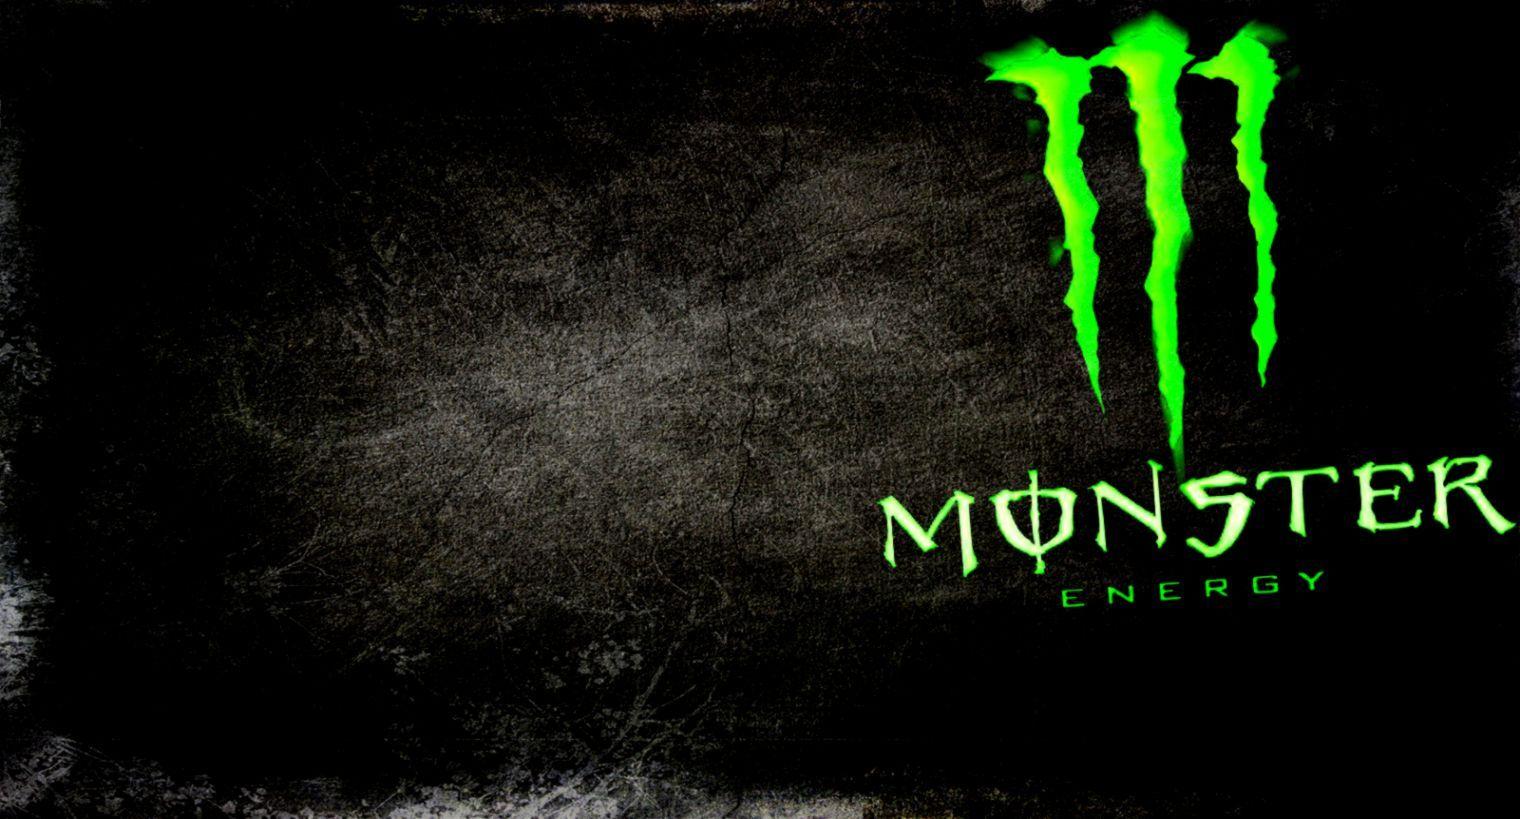 Cool Monster Logo - Best Monster Energy Logo Cool Wallpapers | Image Wallpaper Collections